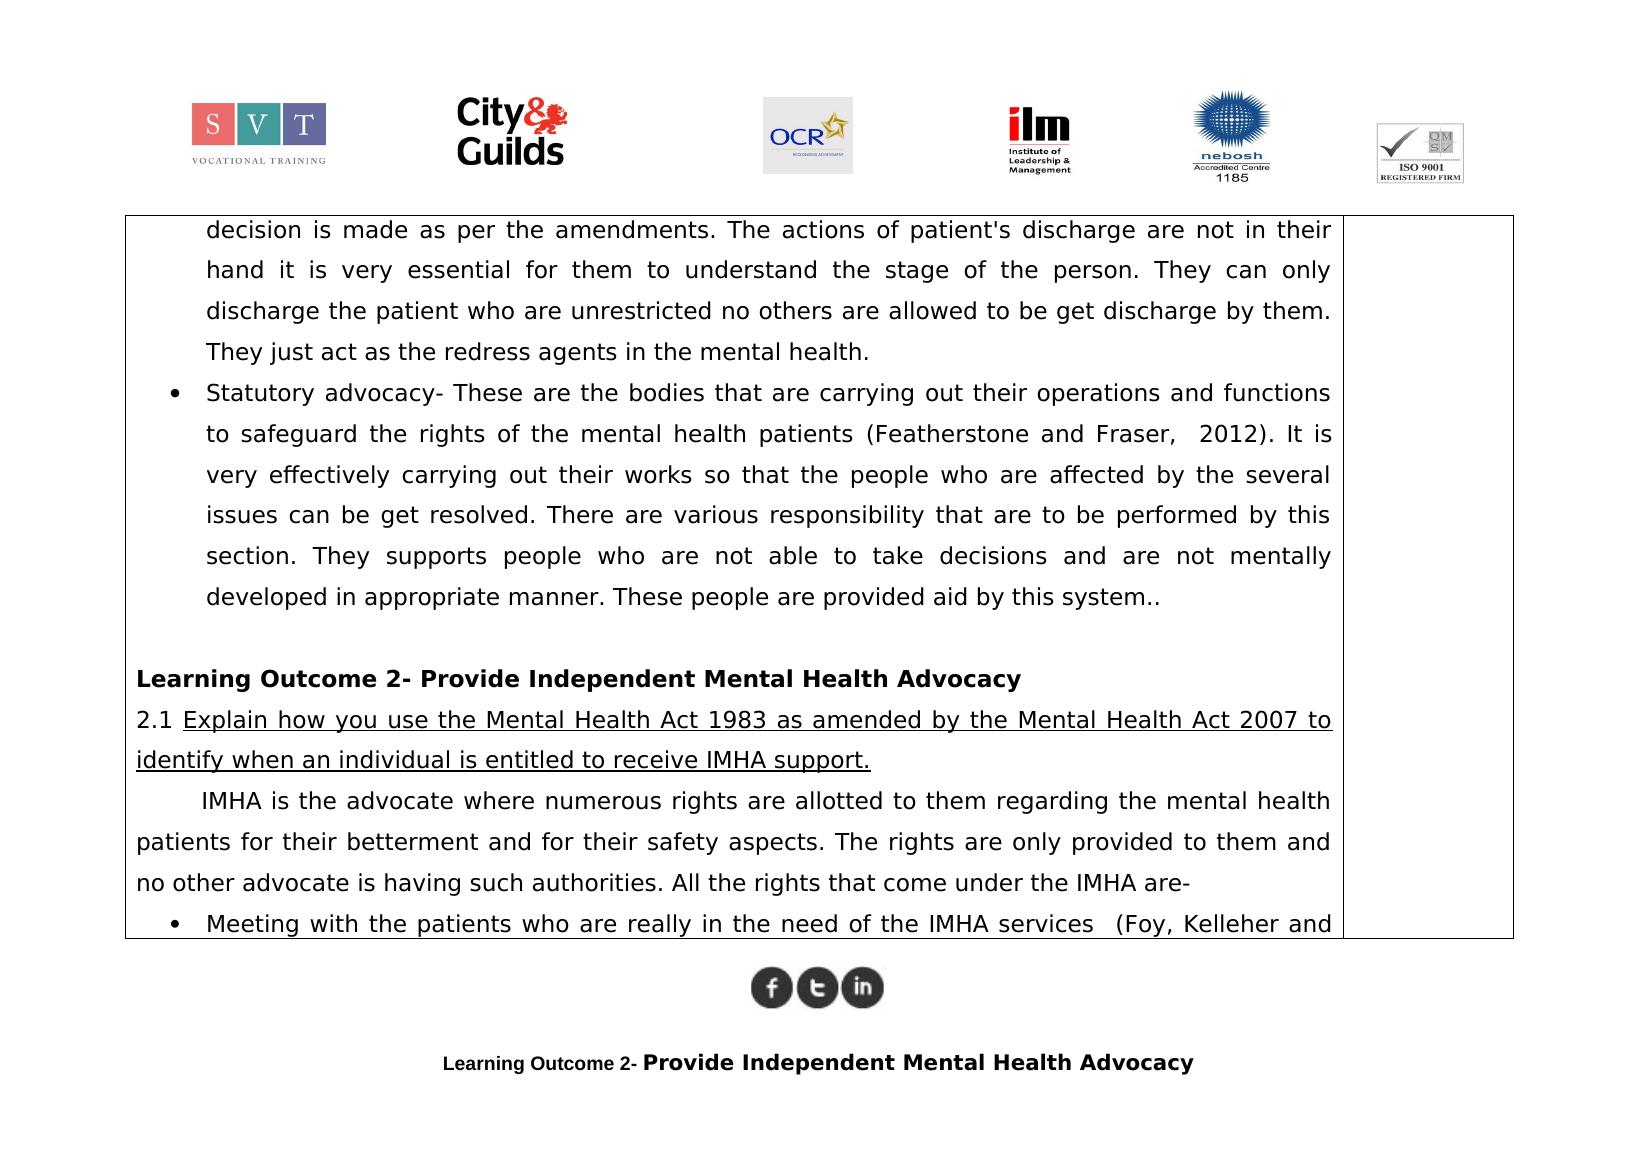 Health and Social Care Assignment: Mental Health Advocacy_8